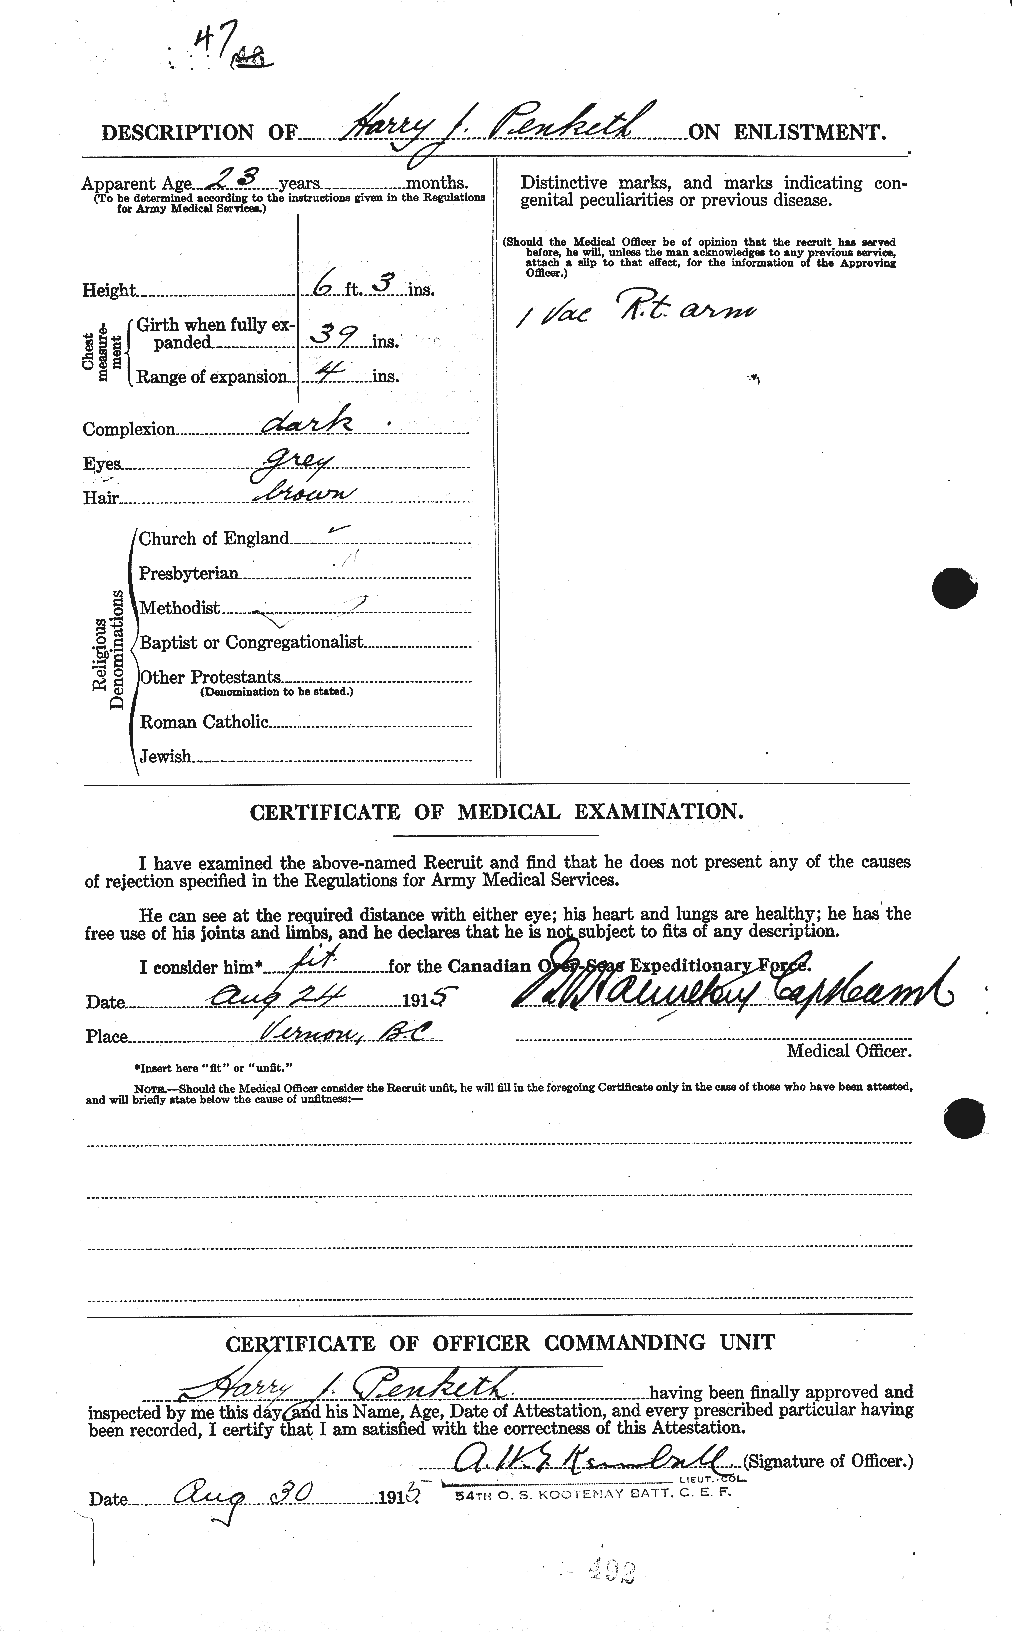 Personnel Records of the First World War - CEF 573040b